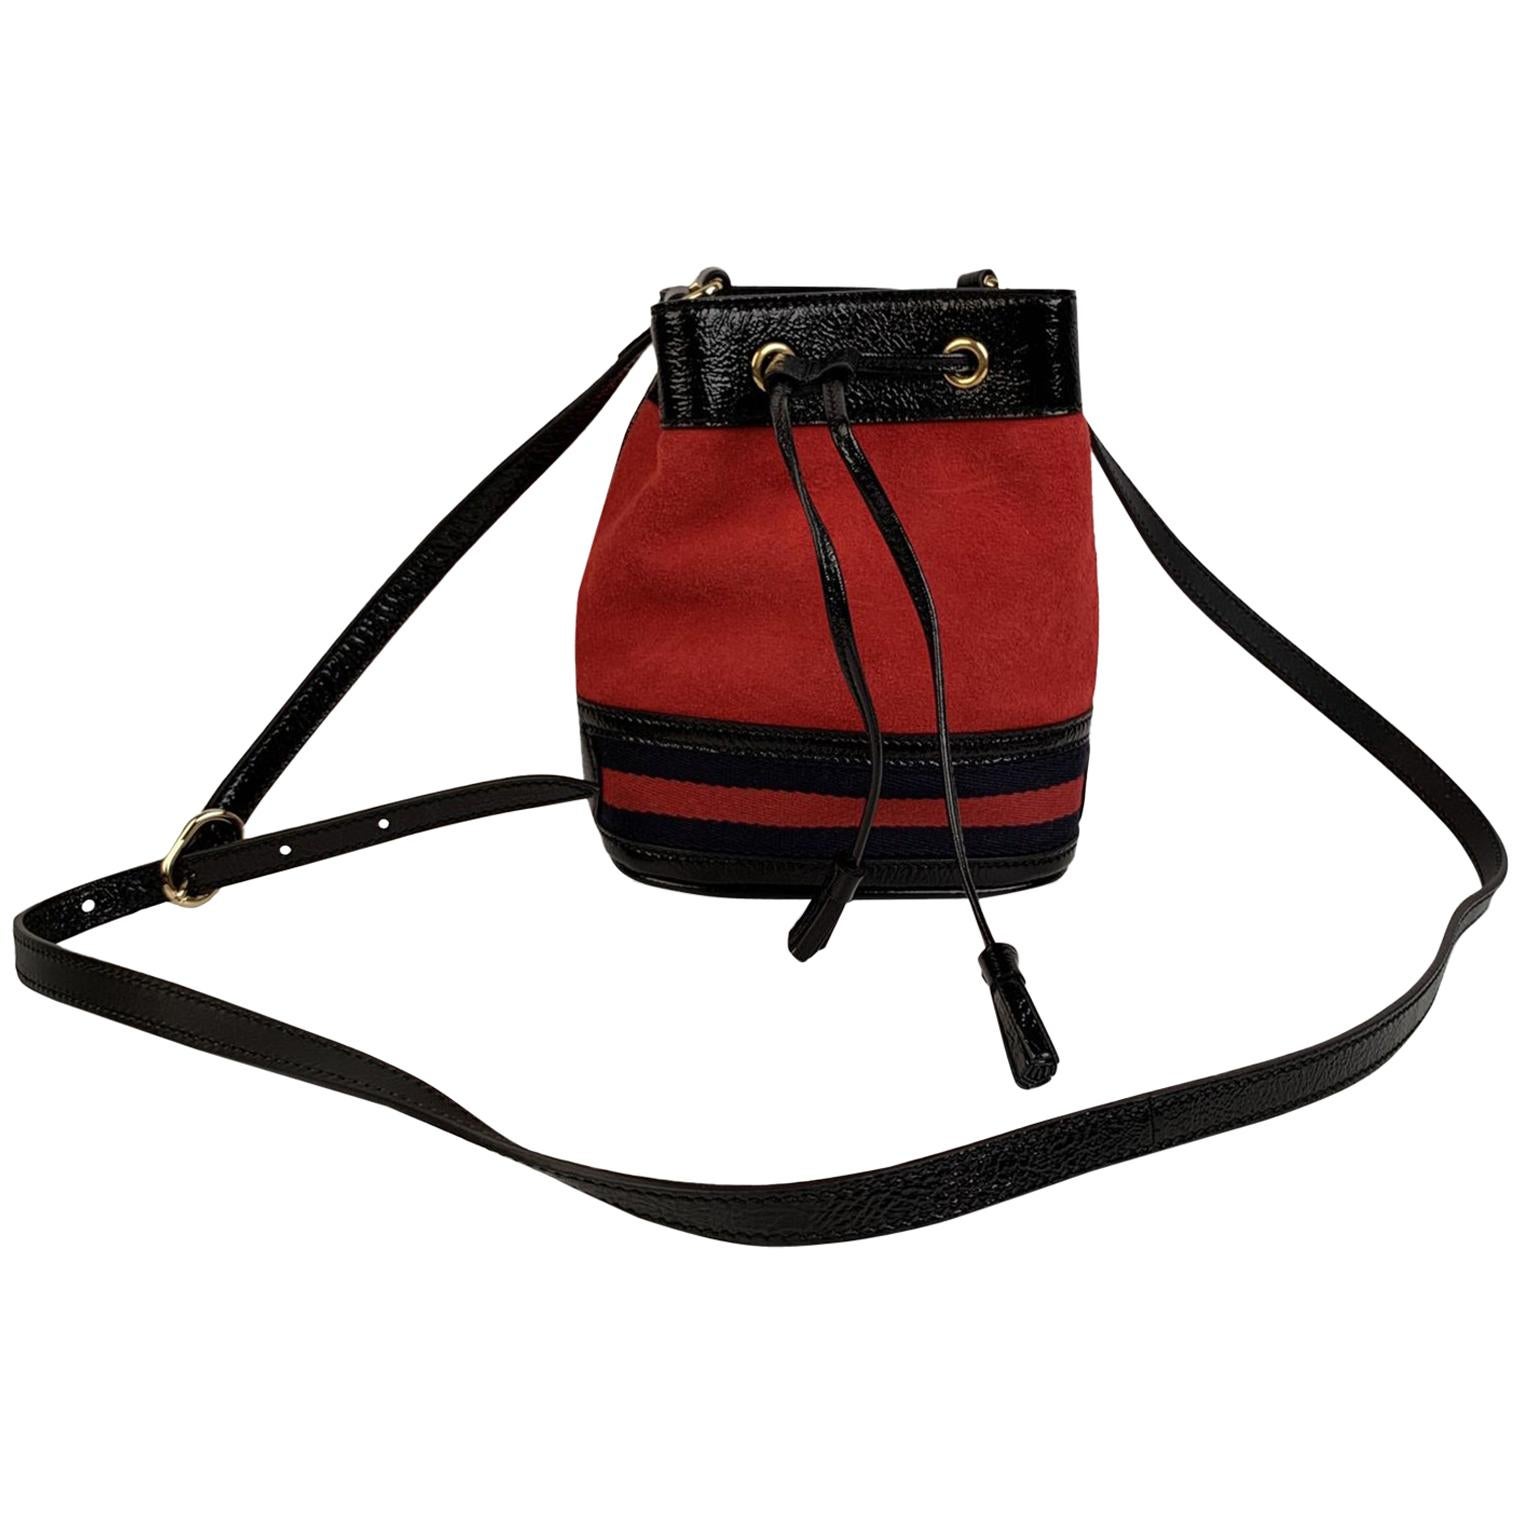 Gucci Suede Signature Web Ophidia Small Bucket Bag Red Black